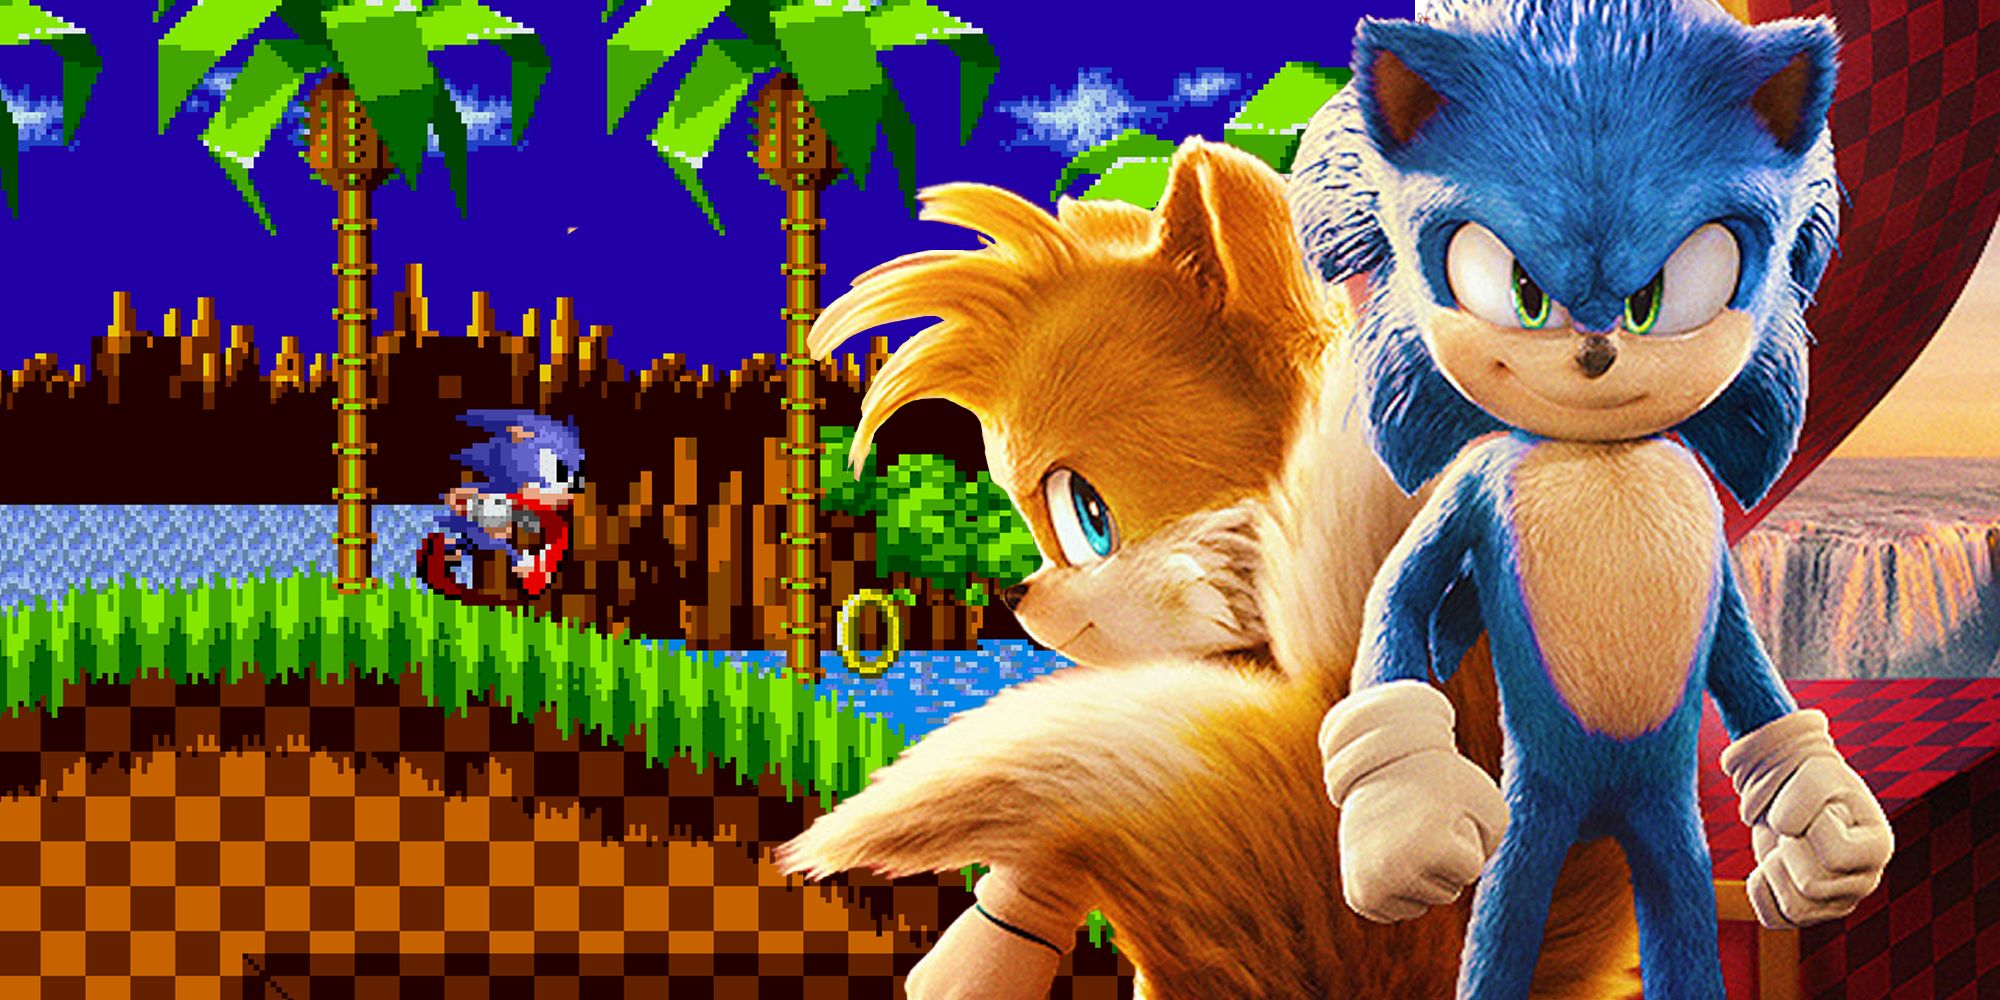 Sonic the hedgehog video game